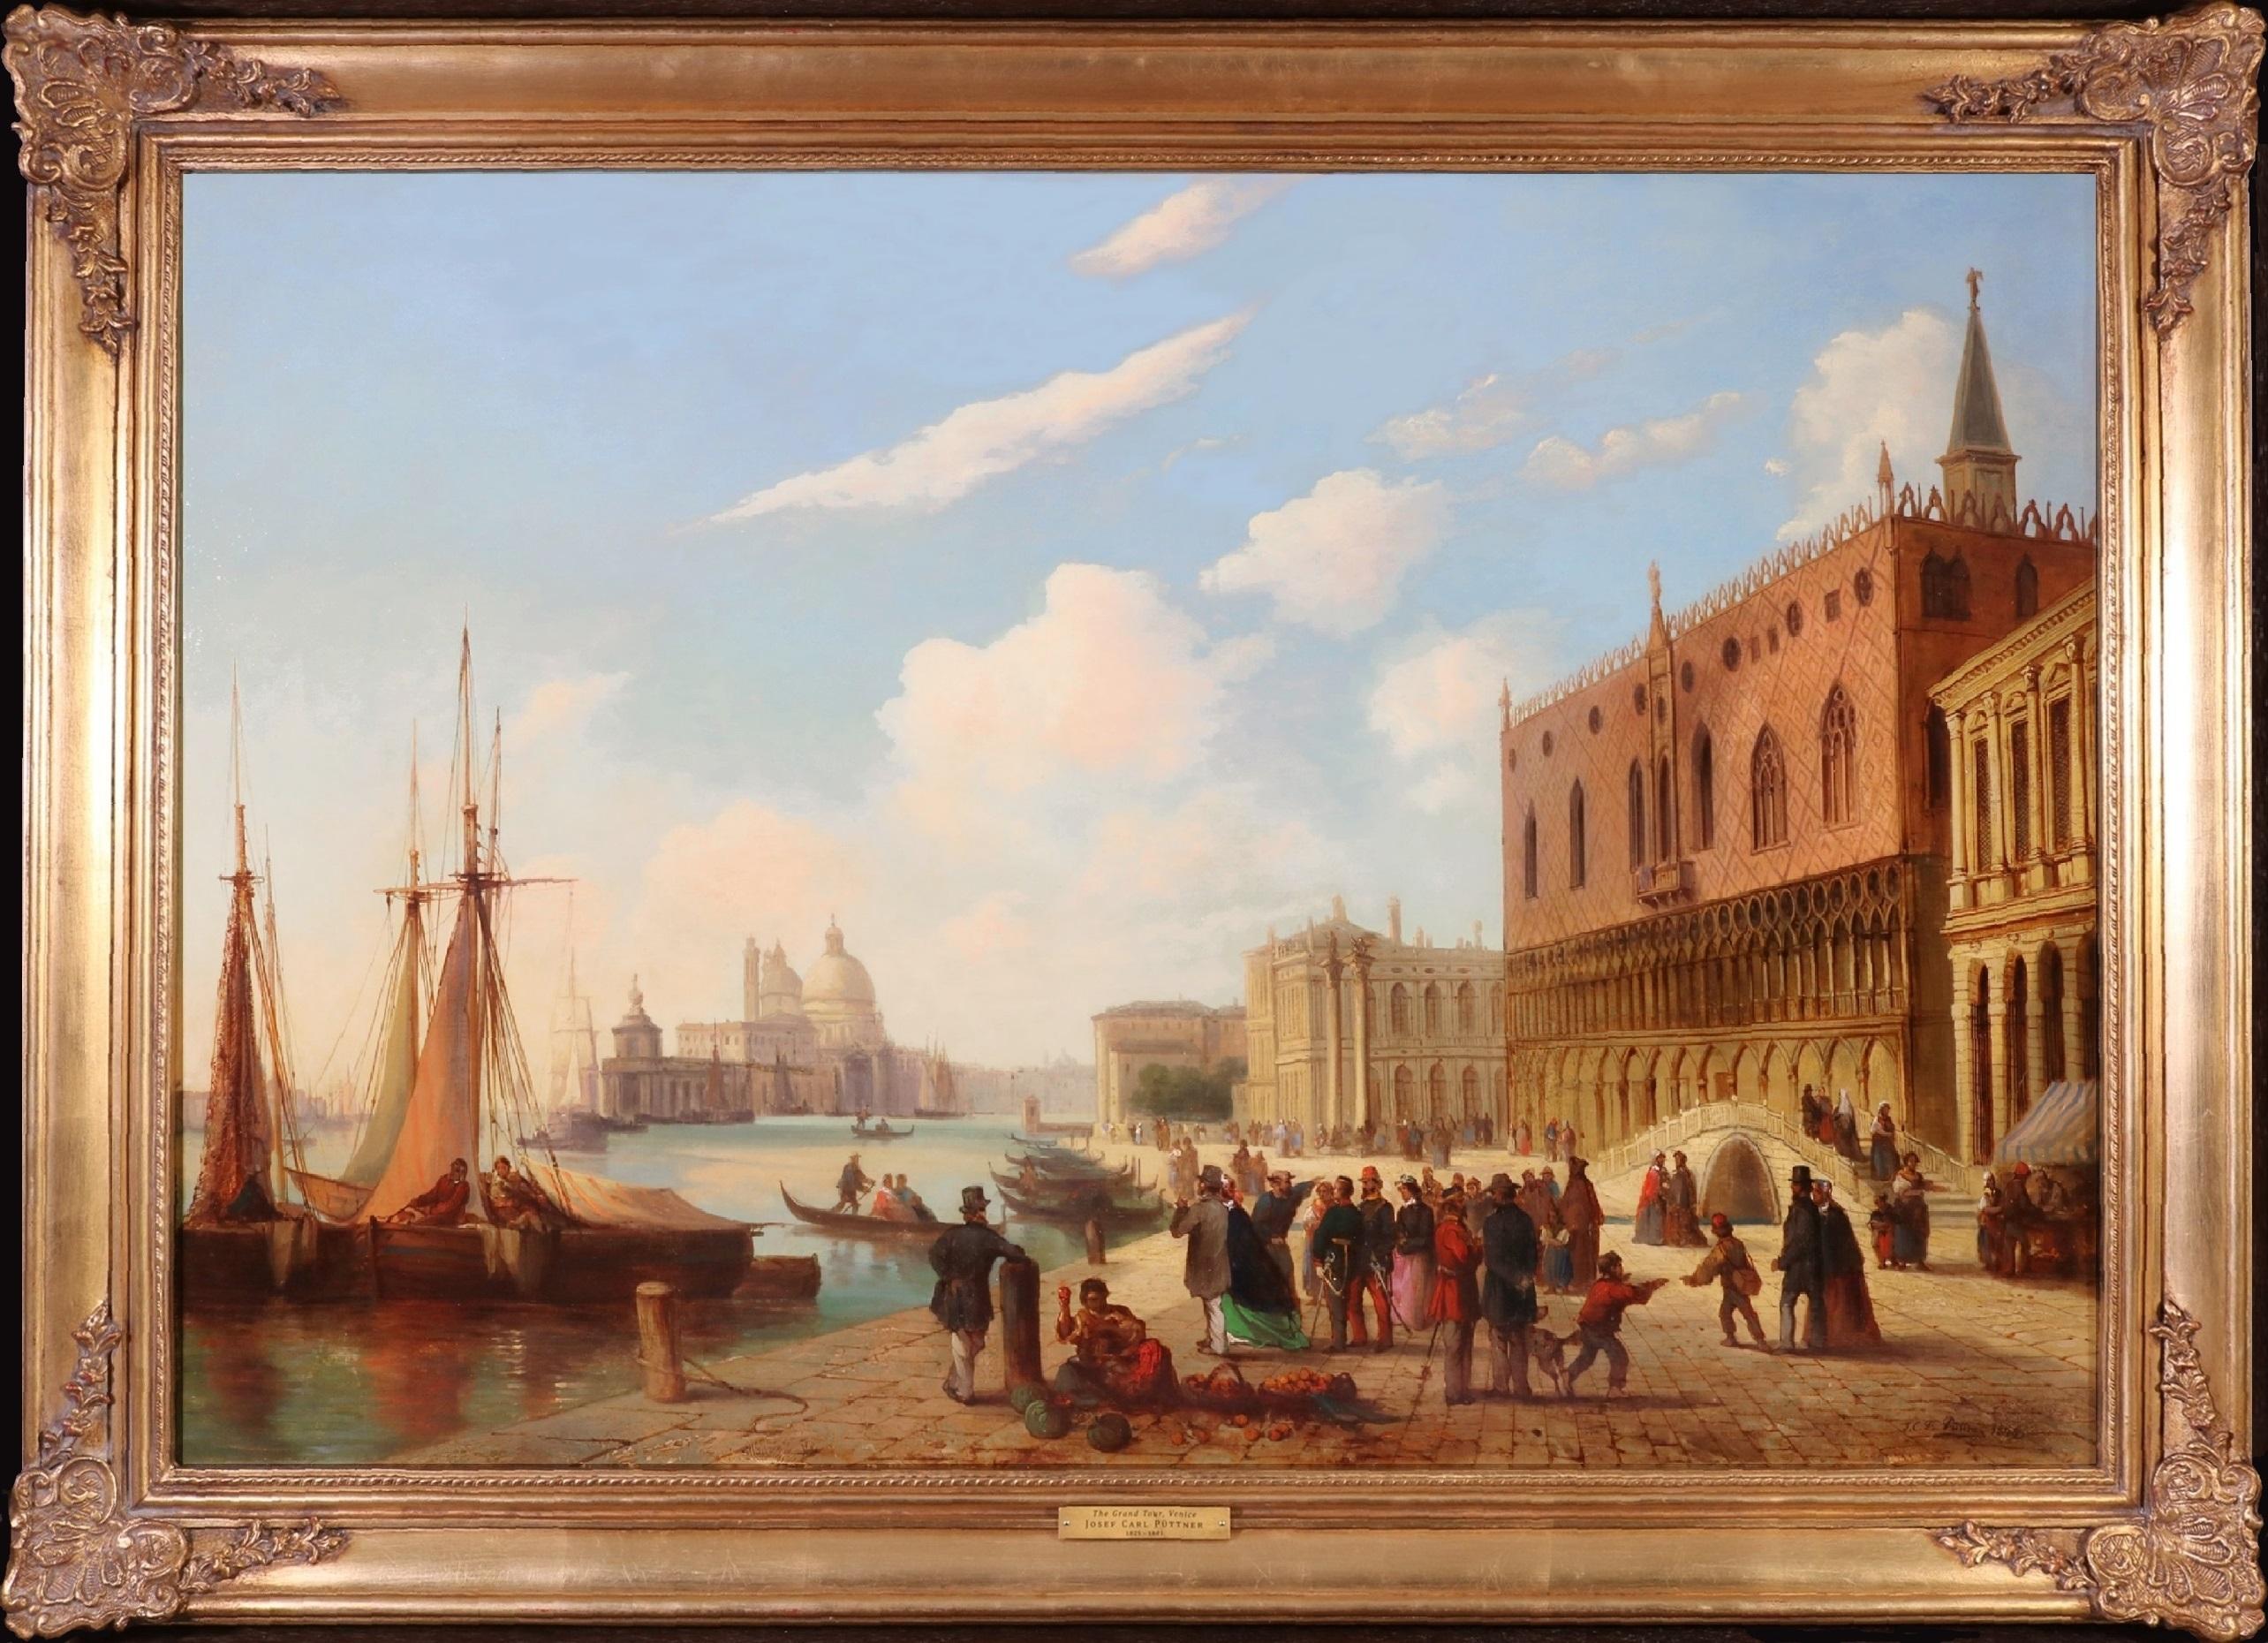 ‘The Grand Tour, Venice’ by Josef Carl Püttner (1821-1881). 

The painting – which depicts a group of 19th century Grand Tourists on the Riva degli Schiavoni waiting for a boat trip on the Grand Canal in Venice – is signed by the artist and dated